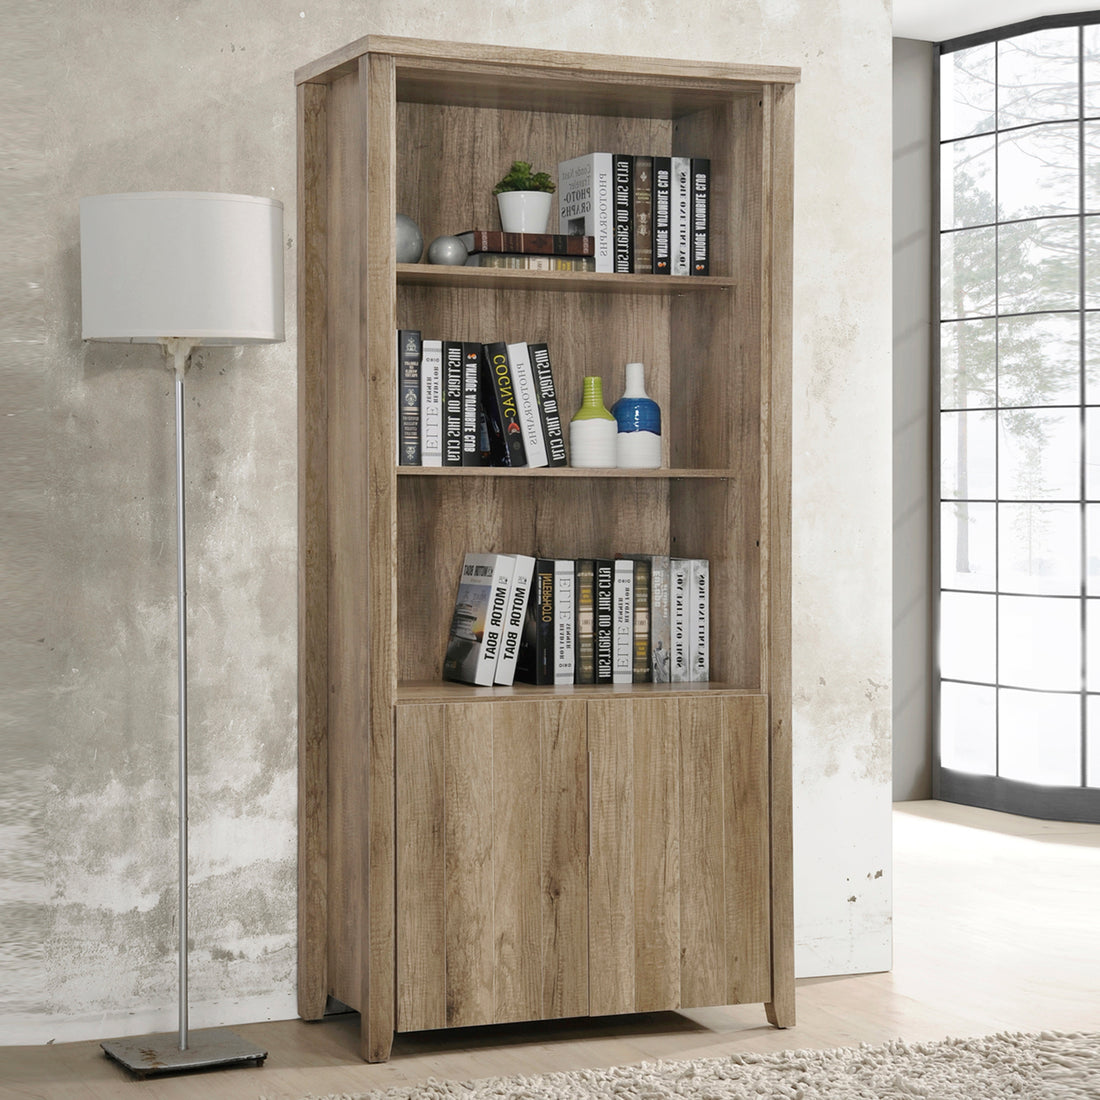 Display Shelf Book Case Stand Bookshelf Natural Wood like MDF in Oak Colour-Bookcases &amp; Shelves-PEROZ Accessories